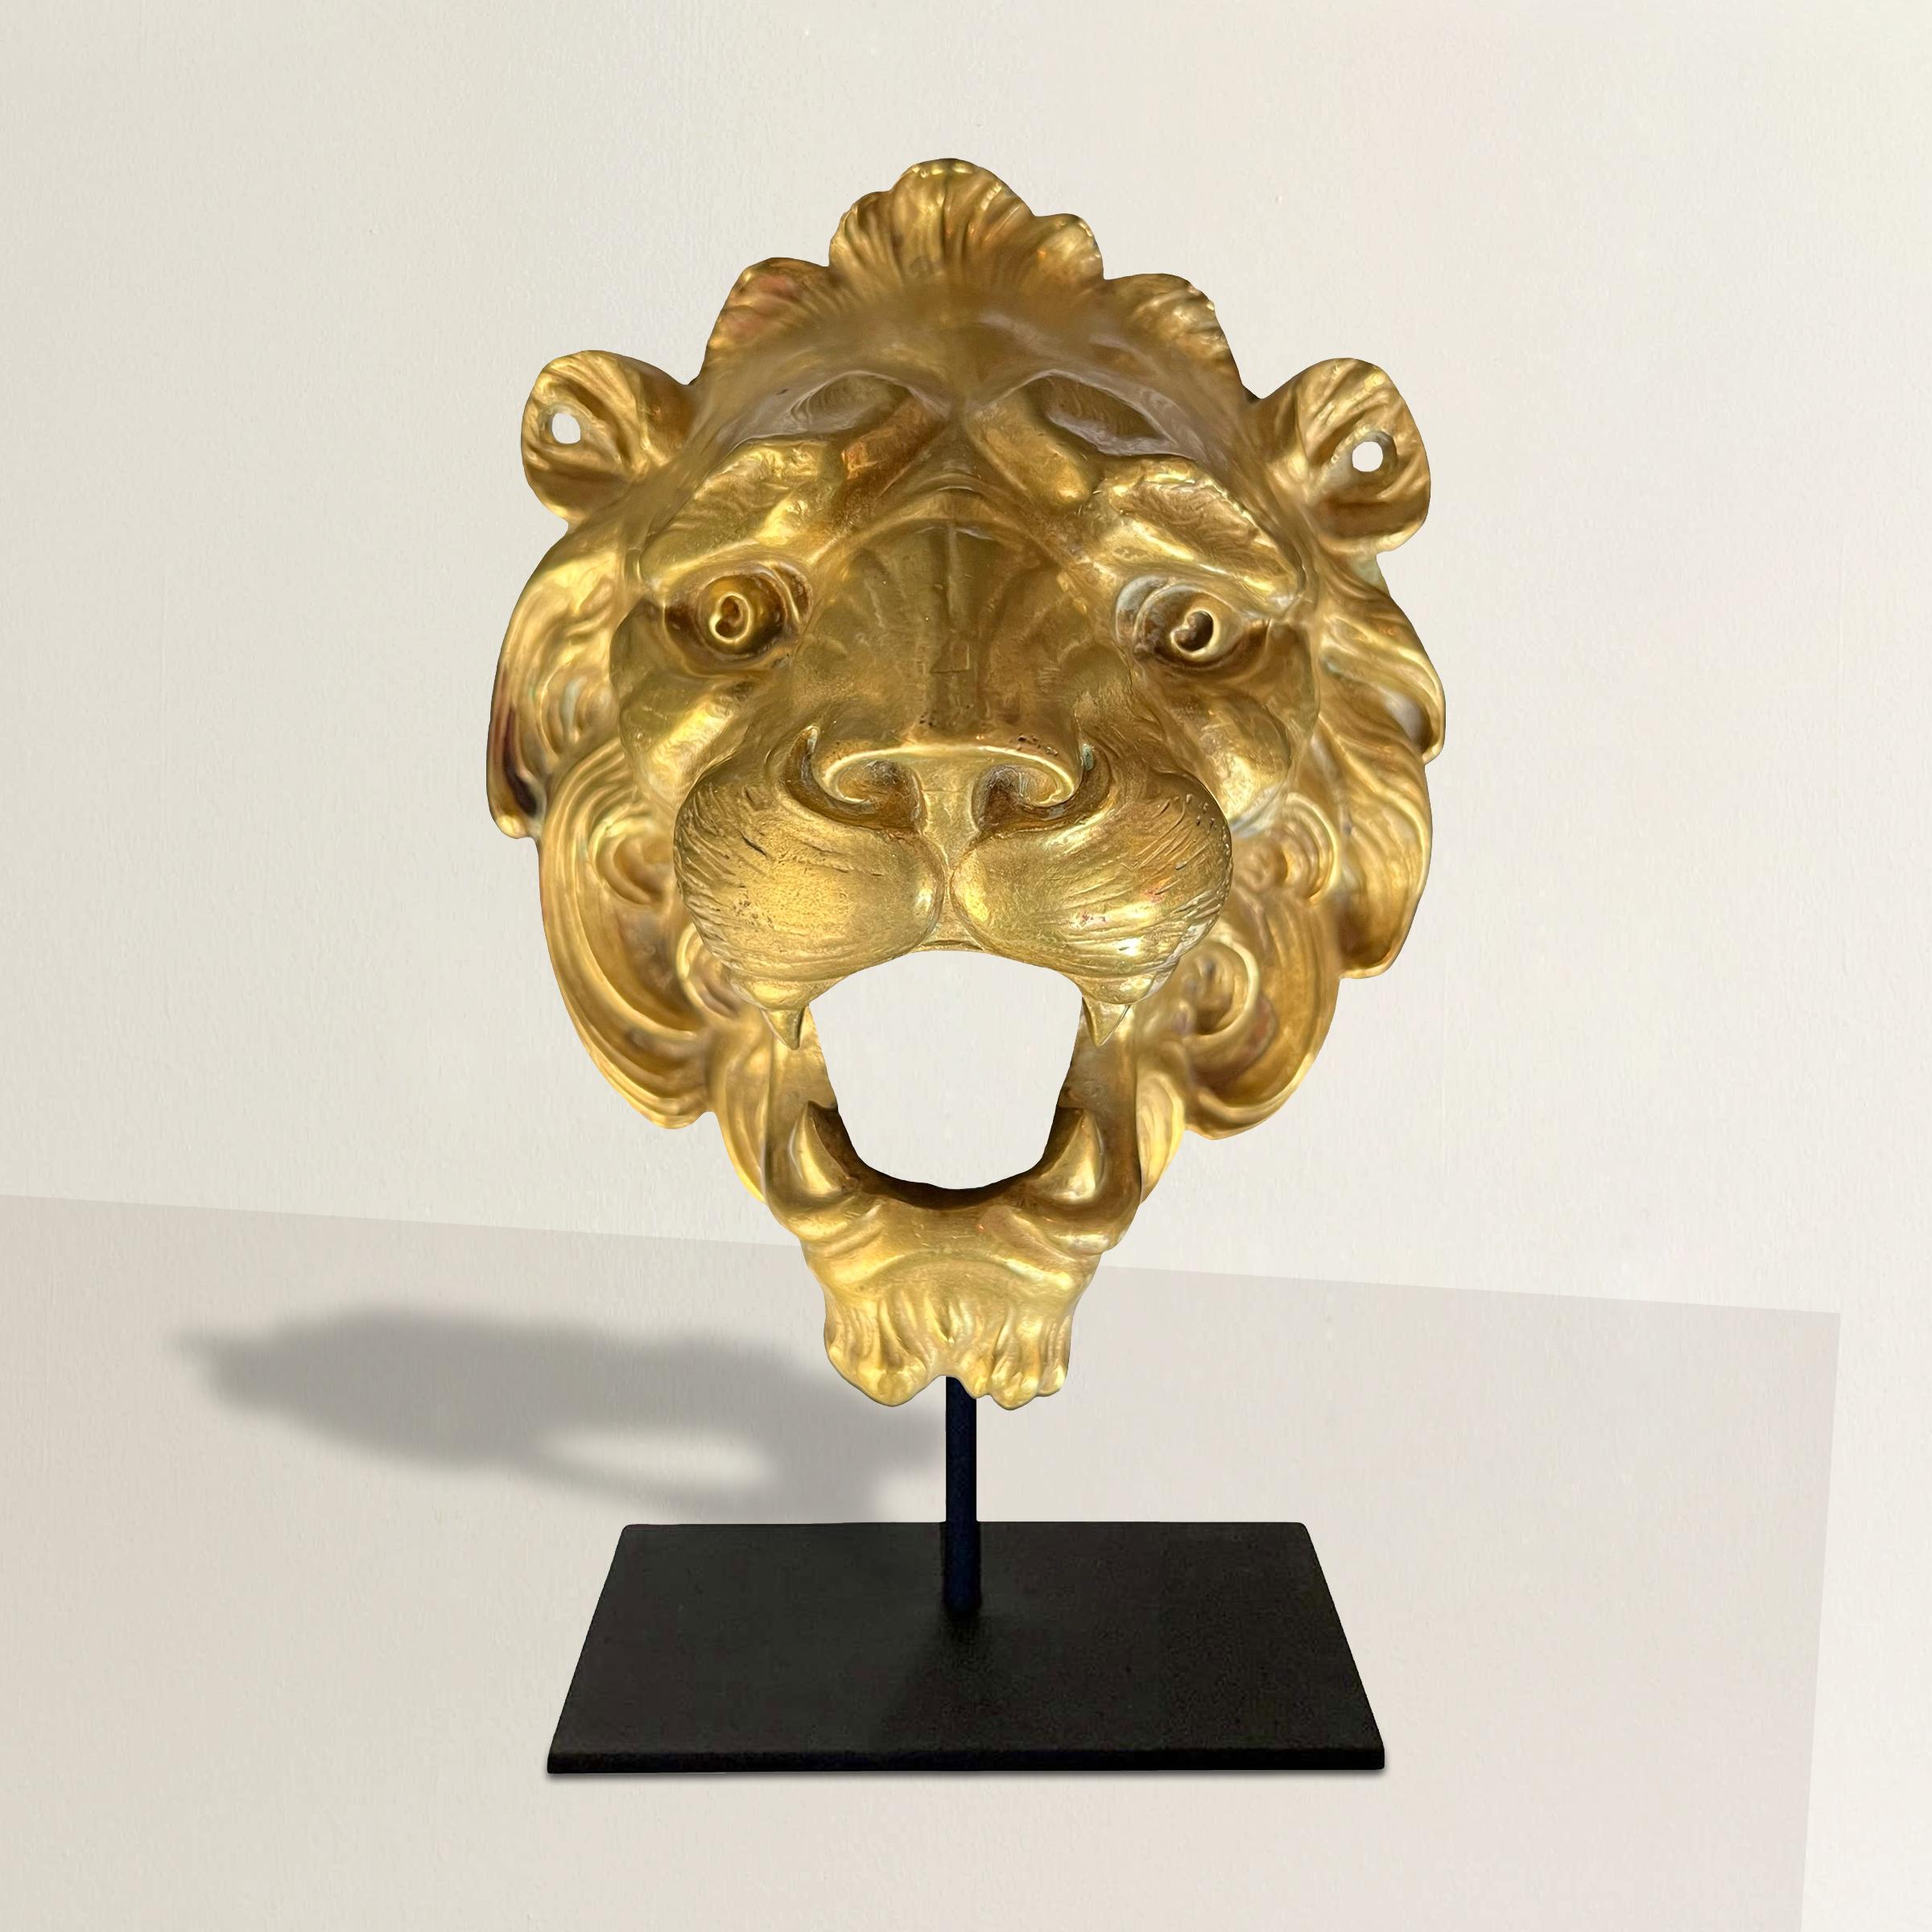 Behold this exquisite 19th-century French gilt bronze lion head architectural fragment, a mesmerizing relic of a bygone era. This captivating piece features a majestic lion with an open mouth, revealing intricately detailed teeth, surrounded by a